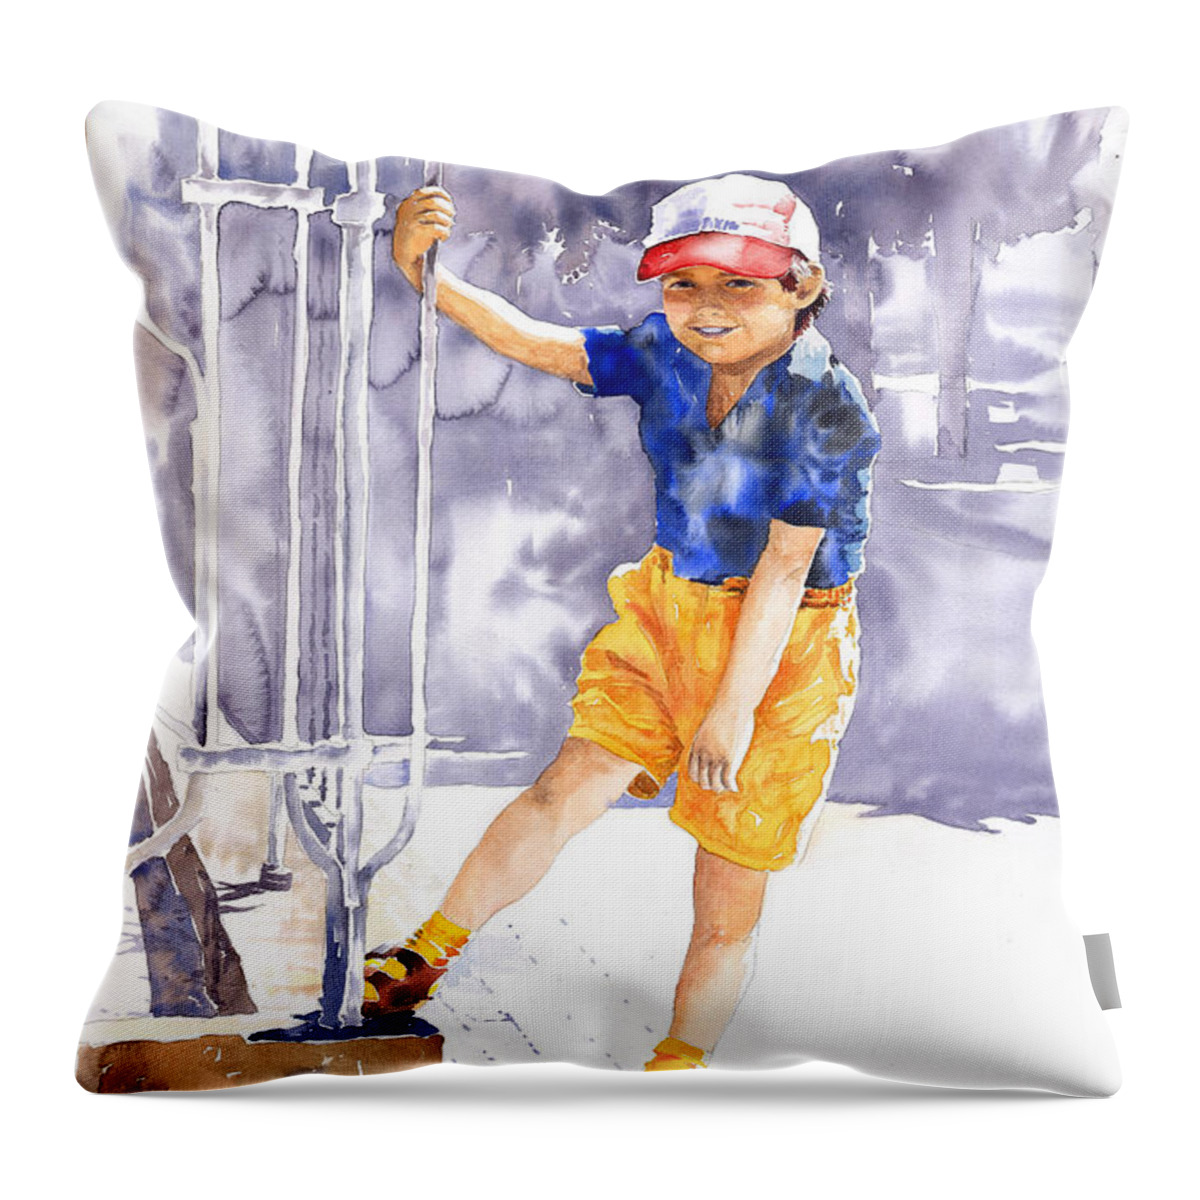 Watercolor Watercolour Figurativ Portret Throw Pillow featuring the painting Denis 02 by Yuriy Shevchuk